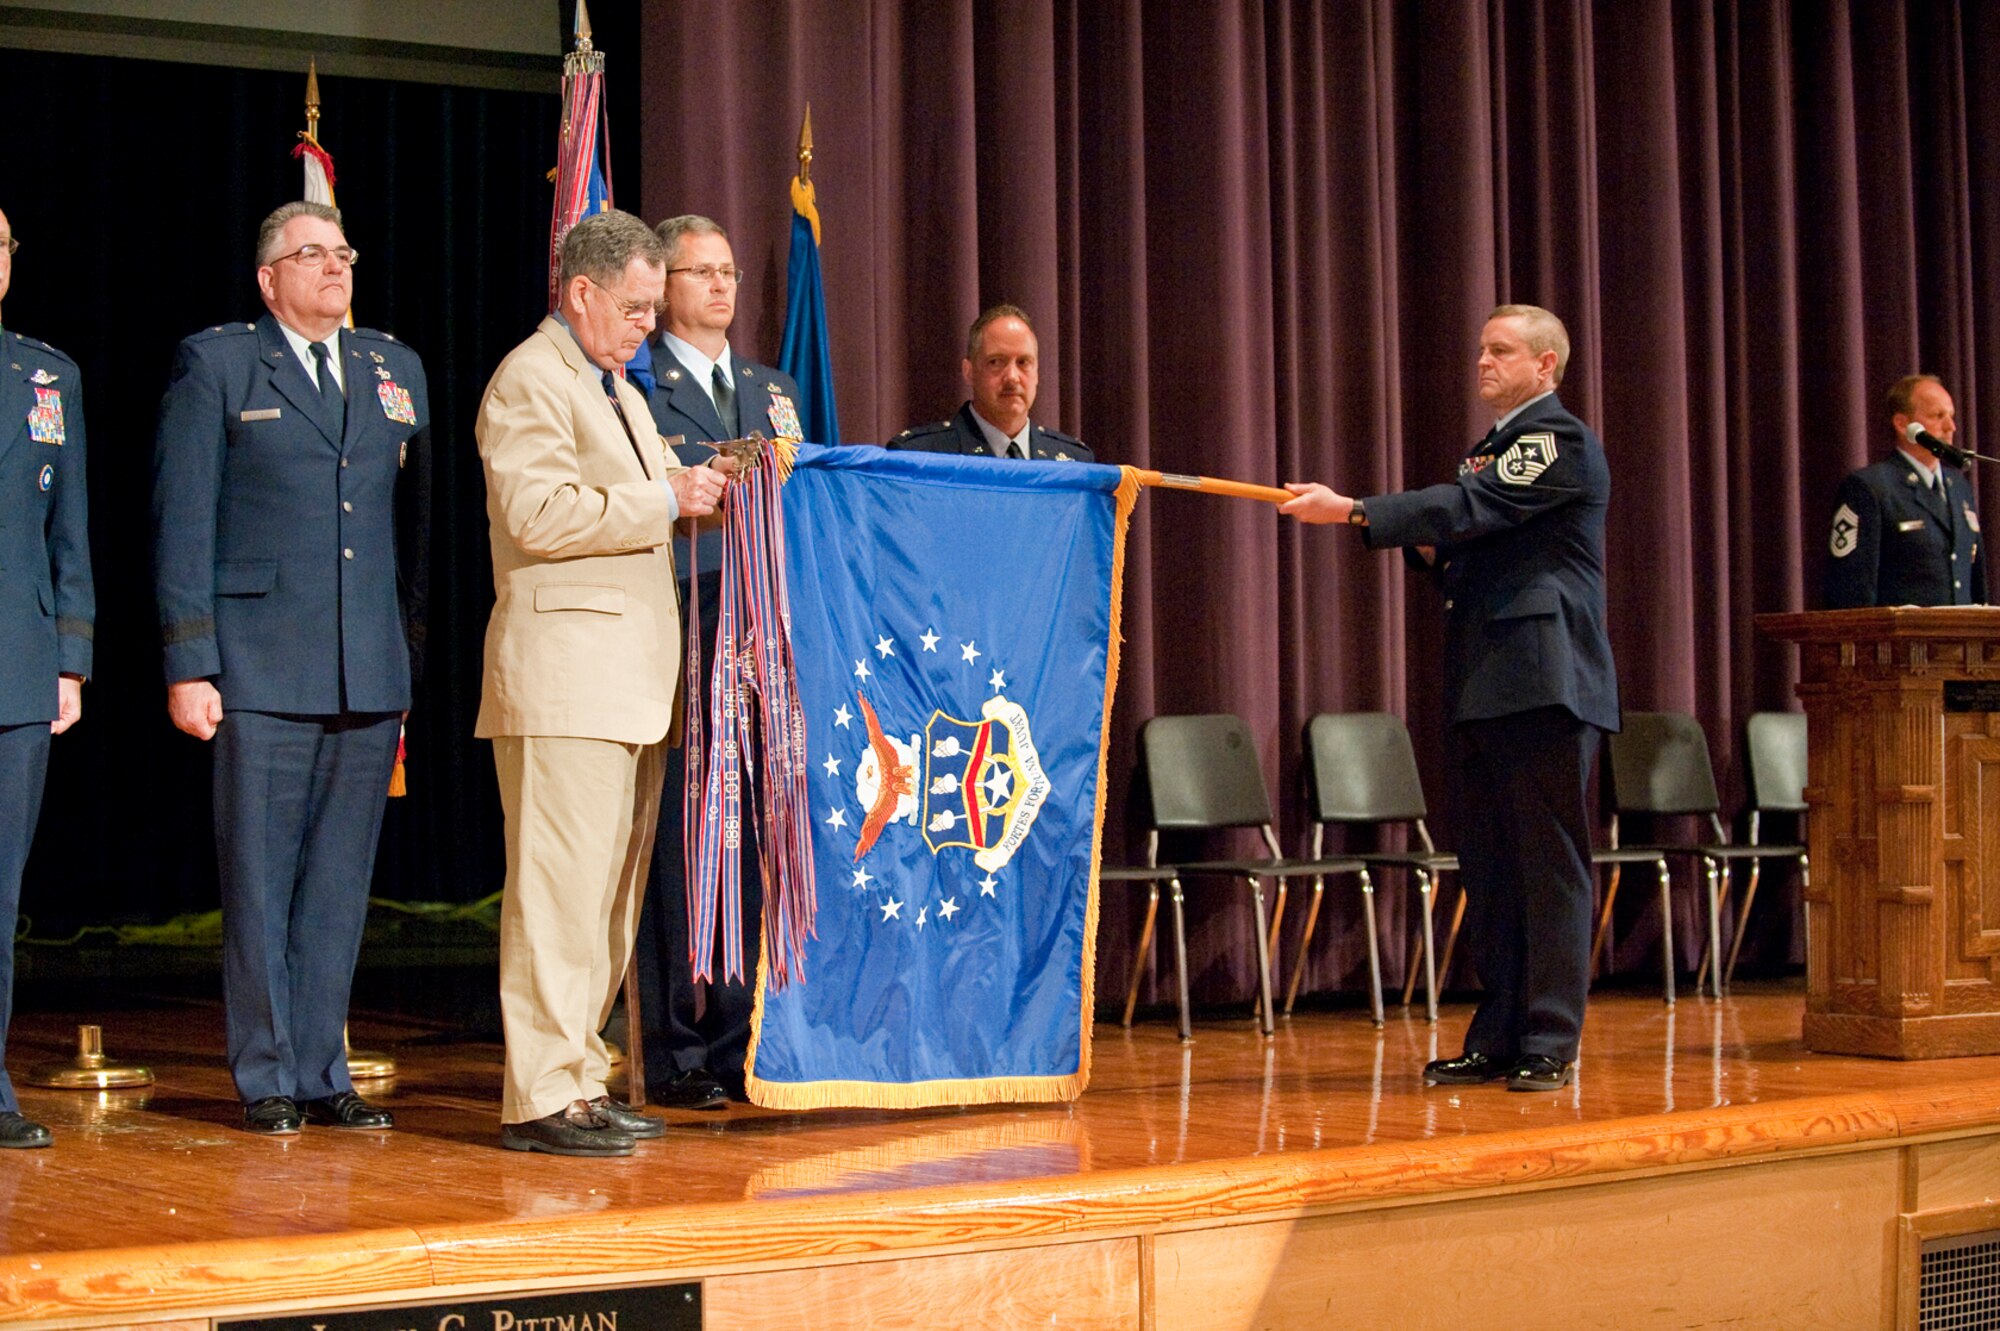 Dennis M. McCarthy, assistant secretary for Reserve Affairs (far left), pins a streamer representing the 123rd Airlift Wing's 14 Air Force Outstanding Unit Award onto the wing's guide-on during a ceremony held April 17, 2010 at Louisville Male High School in Louisville, Ky.  The 123rd Airlift Wing has now won more Air Force Outstanding Unit Awards than any other unit in the Air National Guard, officials said. Also pictured (from left to right) are Chief Master Sgt. James Smith, state command chief master sergeant for the Kentucky Air National Guard; Col. Gregory Nelson, commander of the 123rd Airlift Wing; and Chief Master Sgt. Curtis Carpenter, command chief master sergeant of the 123rd Airlift Wing. (U.S. Air Force photo/Maj. Dale Greer)